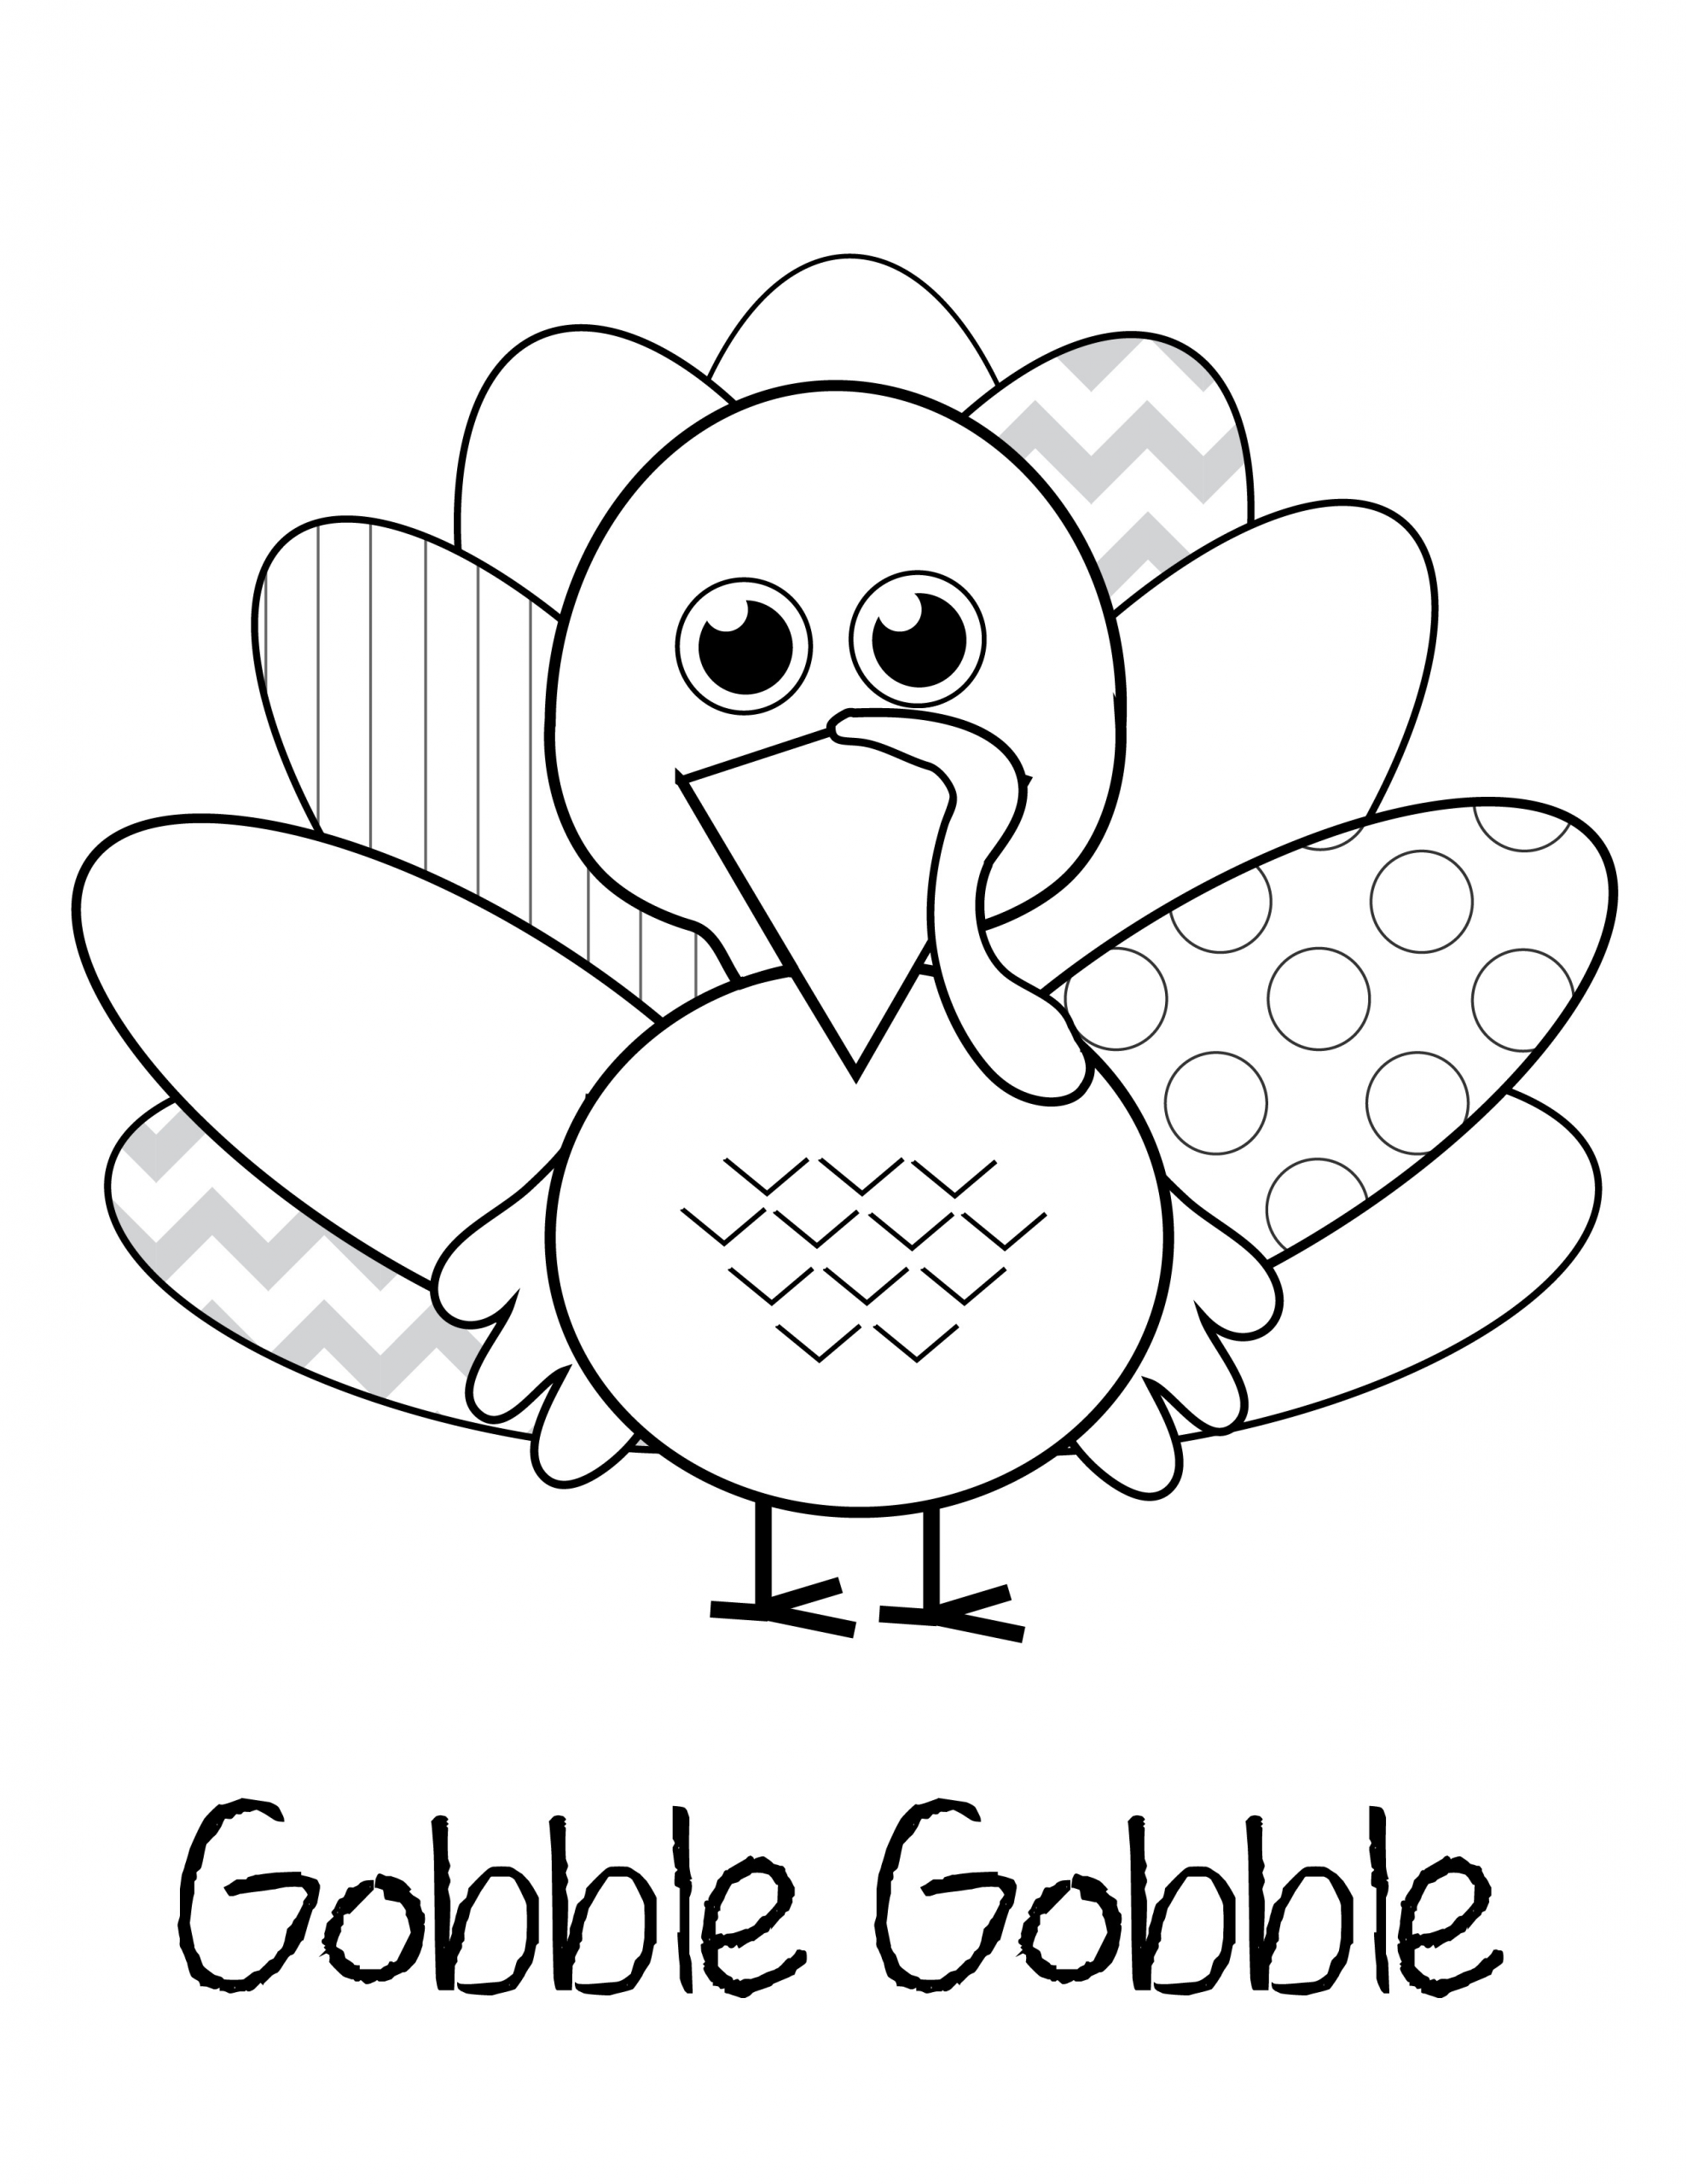 Free Printable Thanksgiving Coloring Pages
 free thanksgiving printables